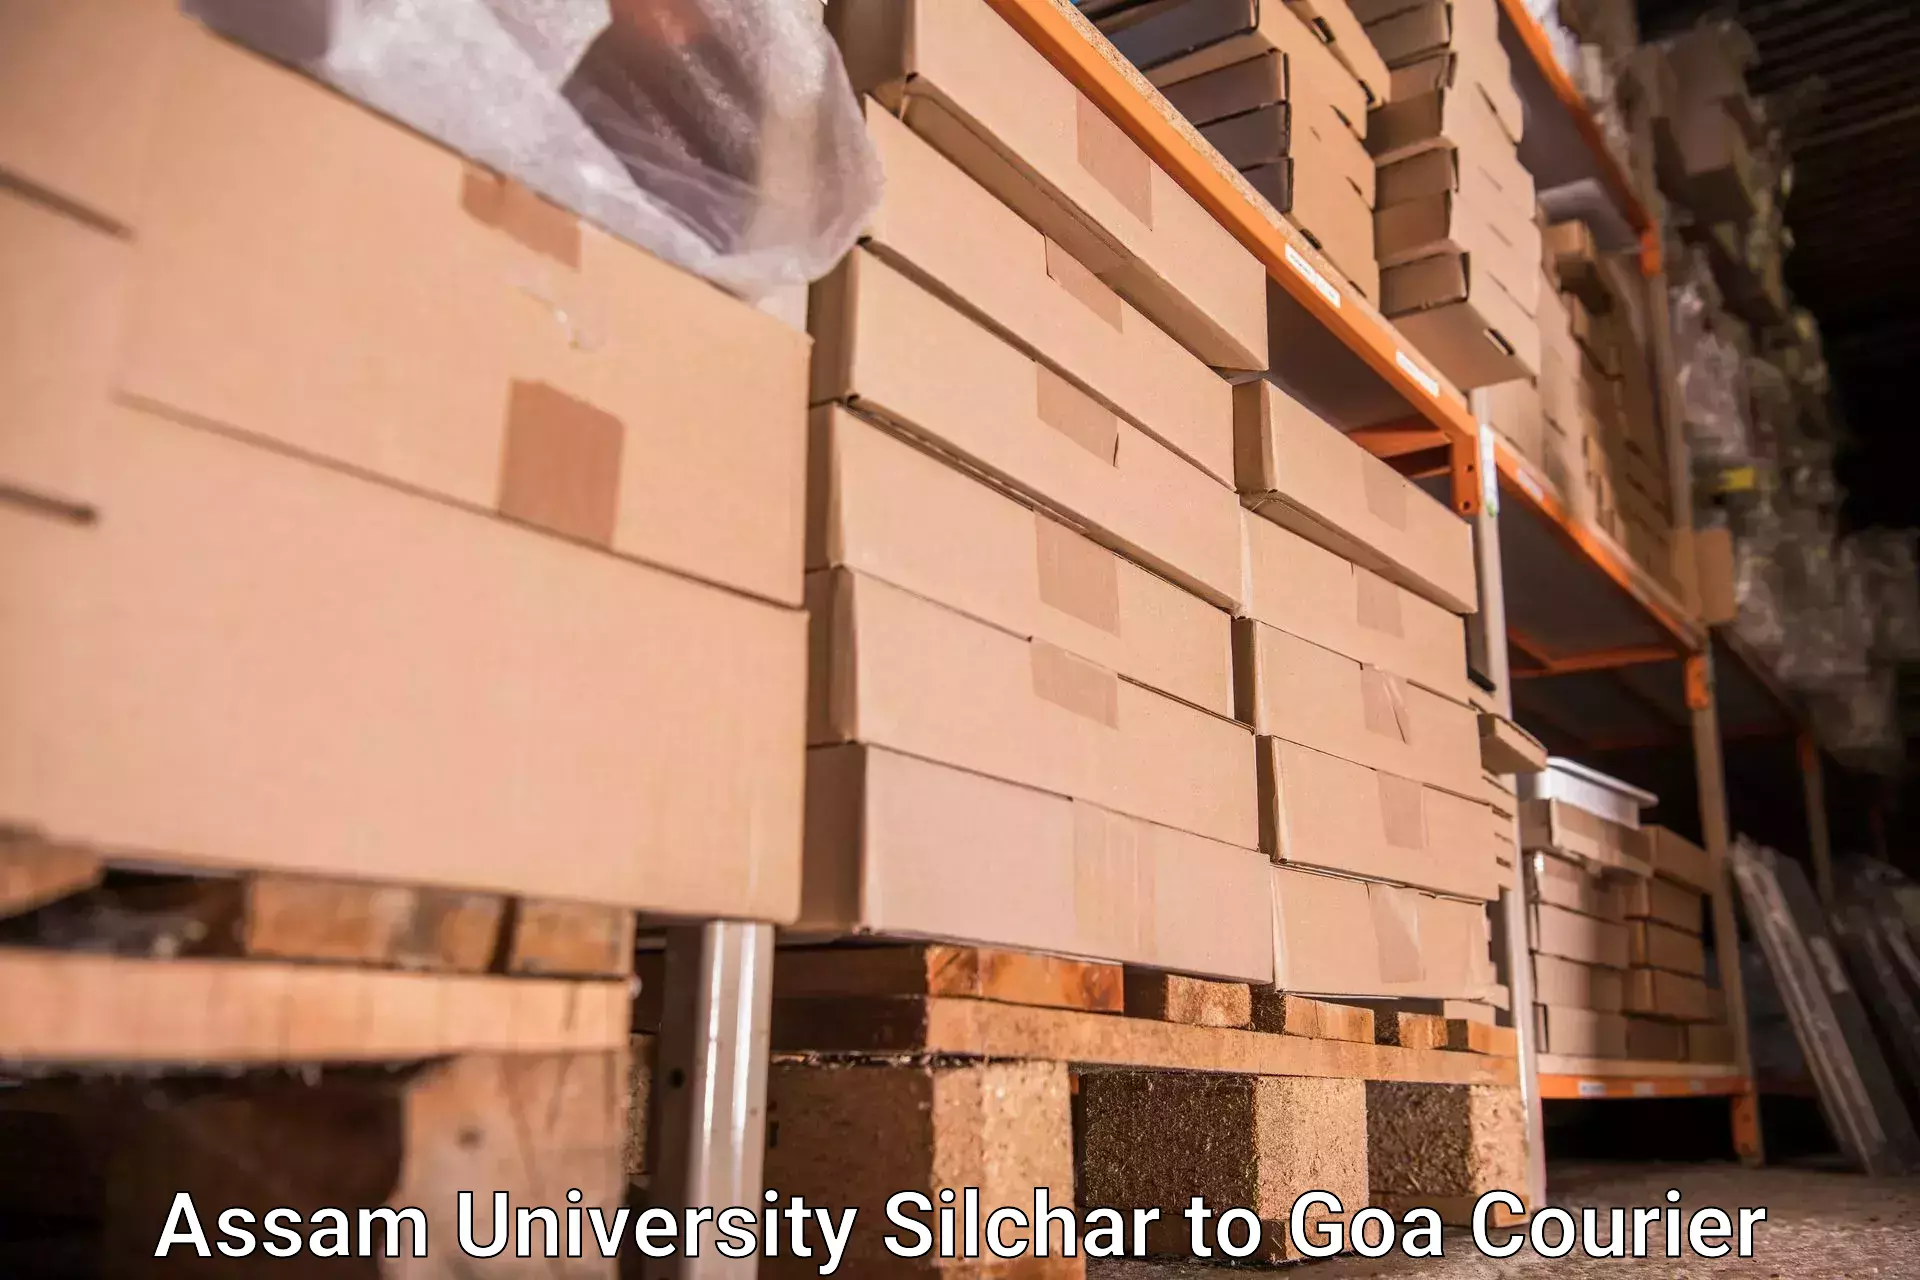 Luggage transport consultancy Assam University Silchar to South Goa